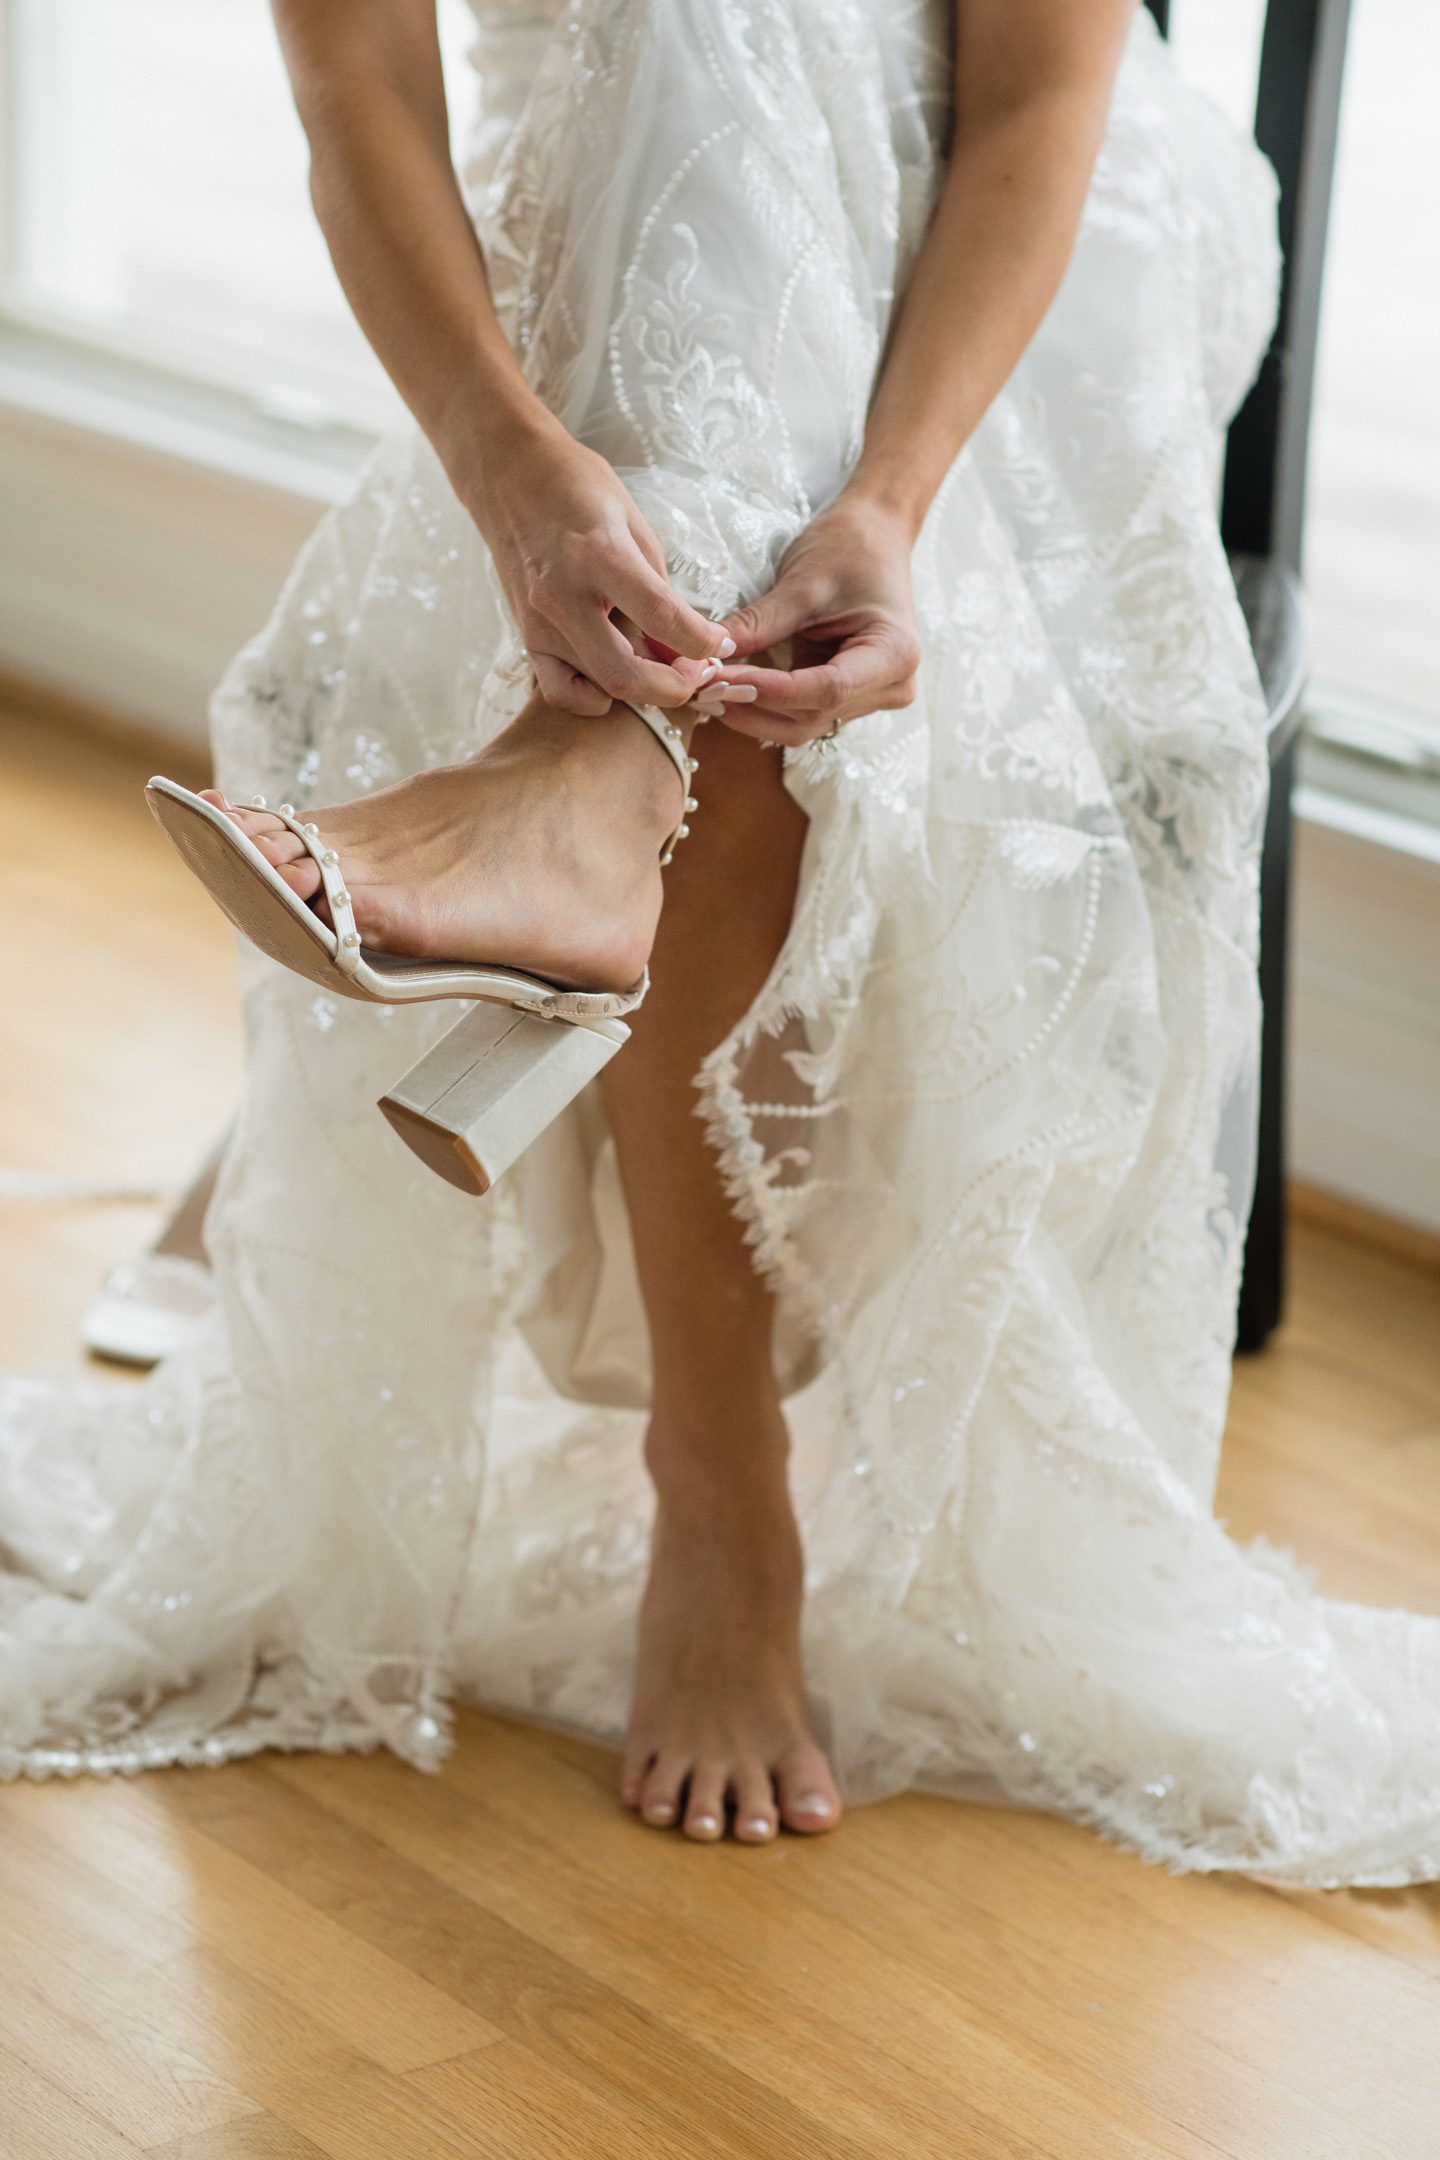 Bride putting on shoes while getting ready for her wedding day